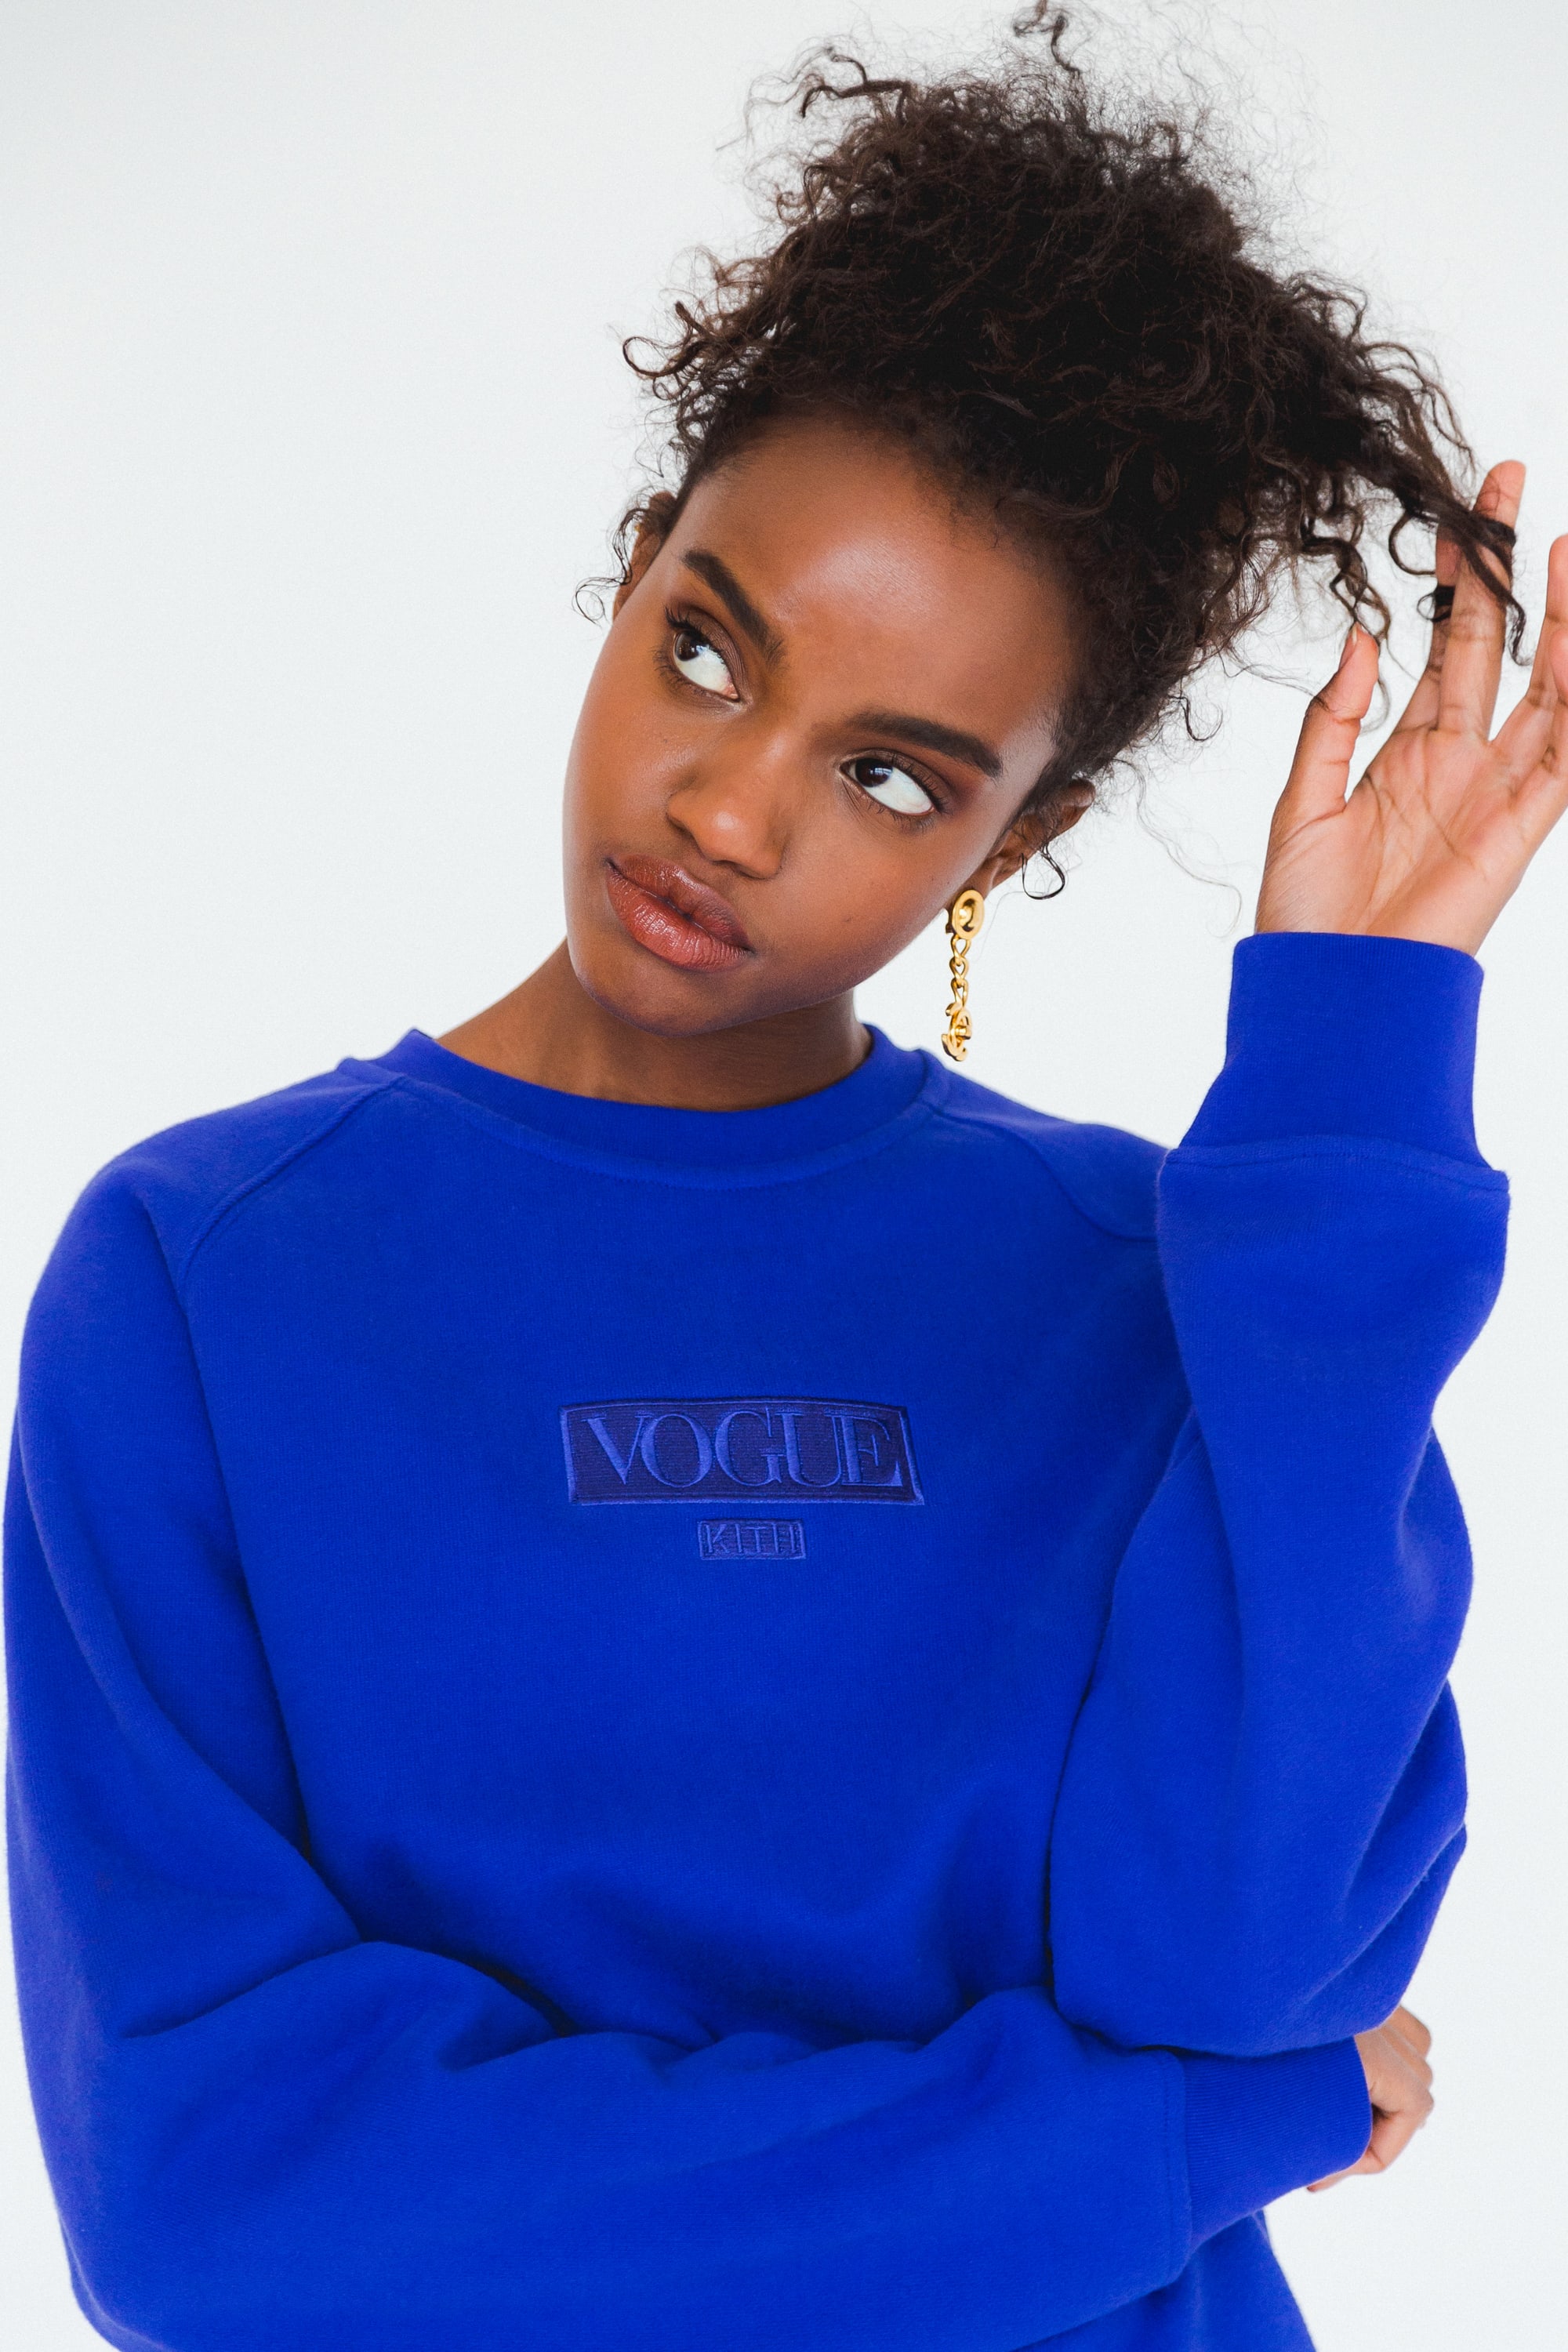 Check out the Full Lookbook for Kith and Vogue’s 125th Anniversary ...